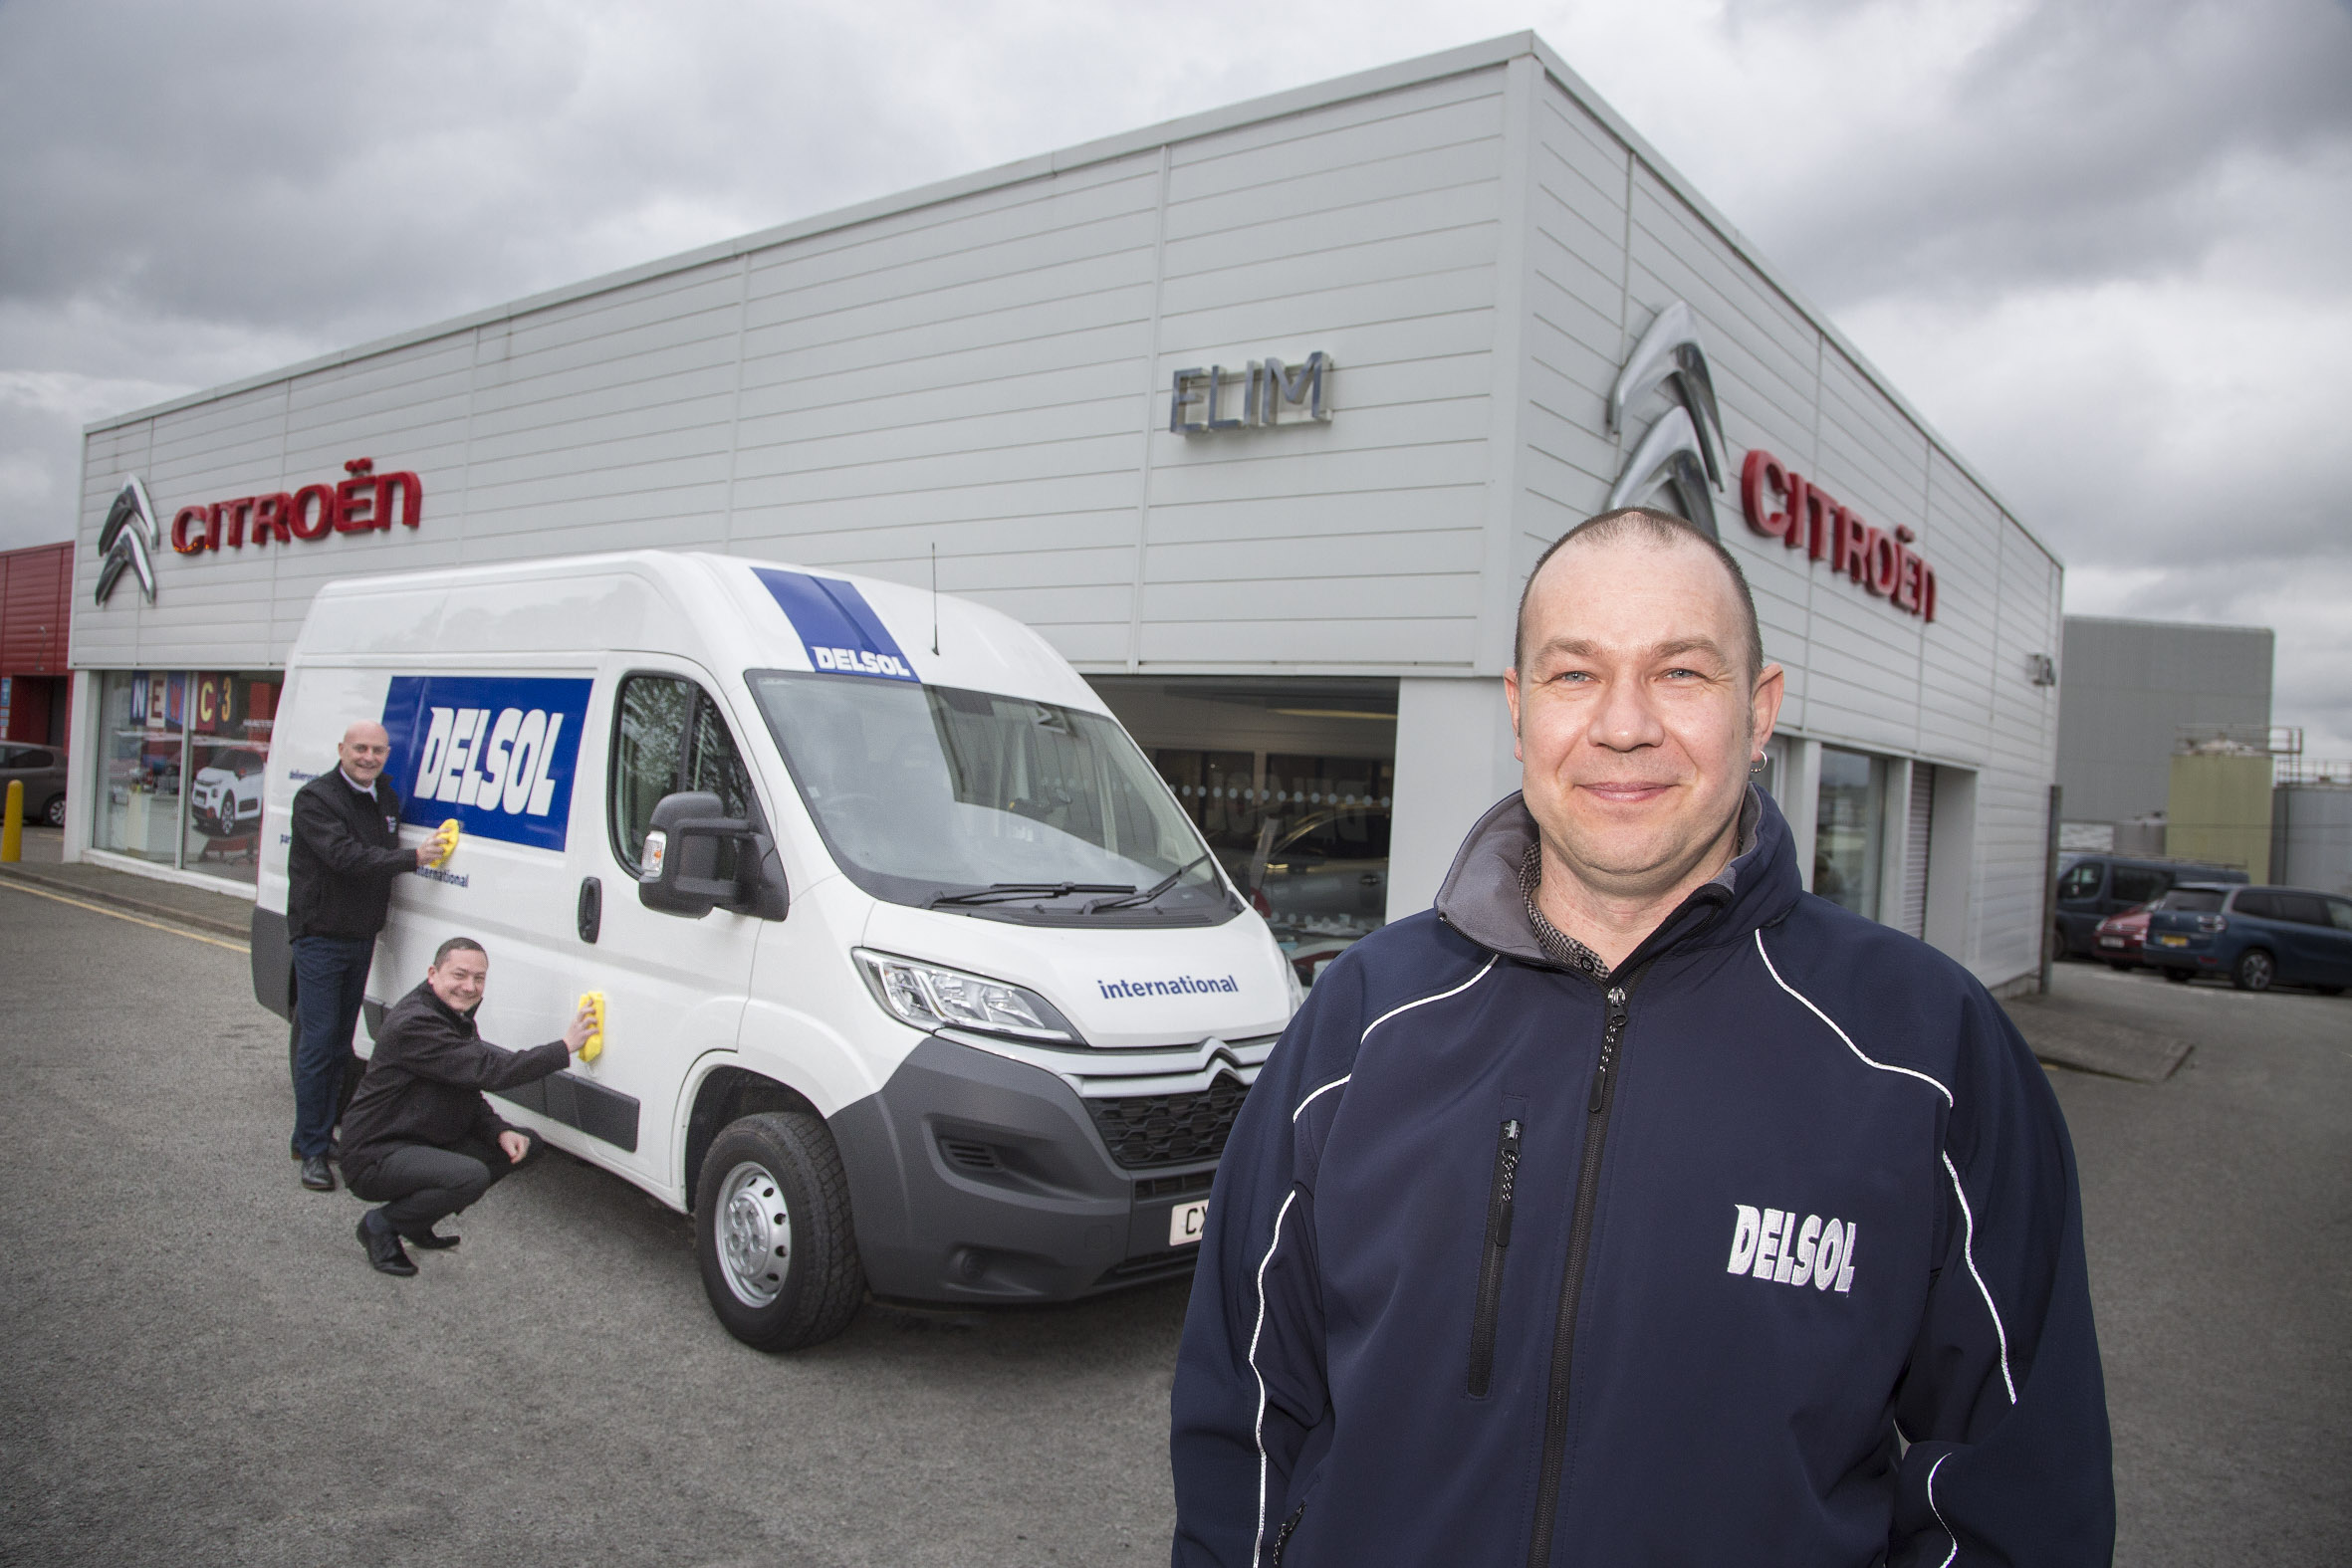 Delivery company Delsol invests £300,000 in fleet of vans from Anglesey dealership